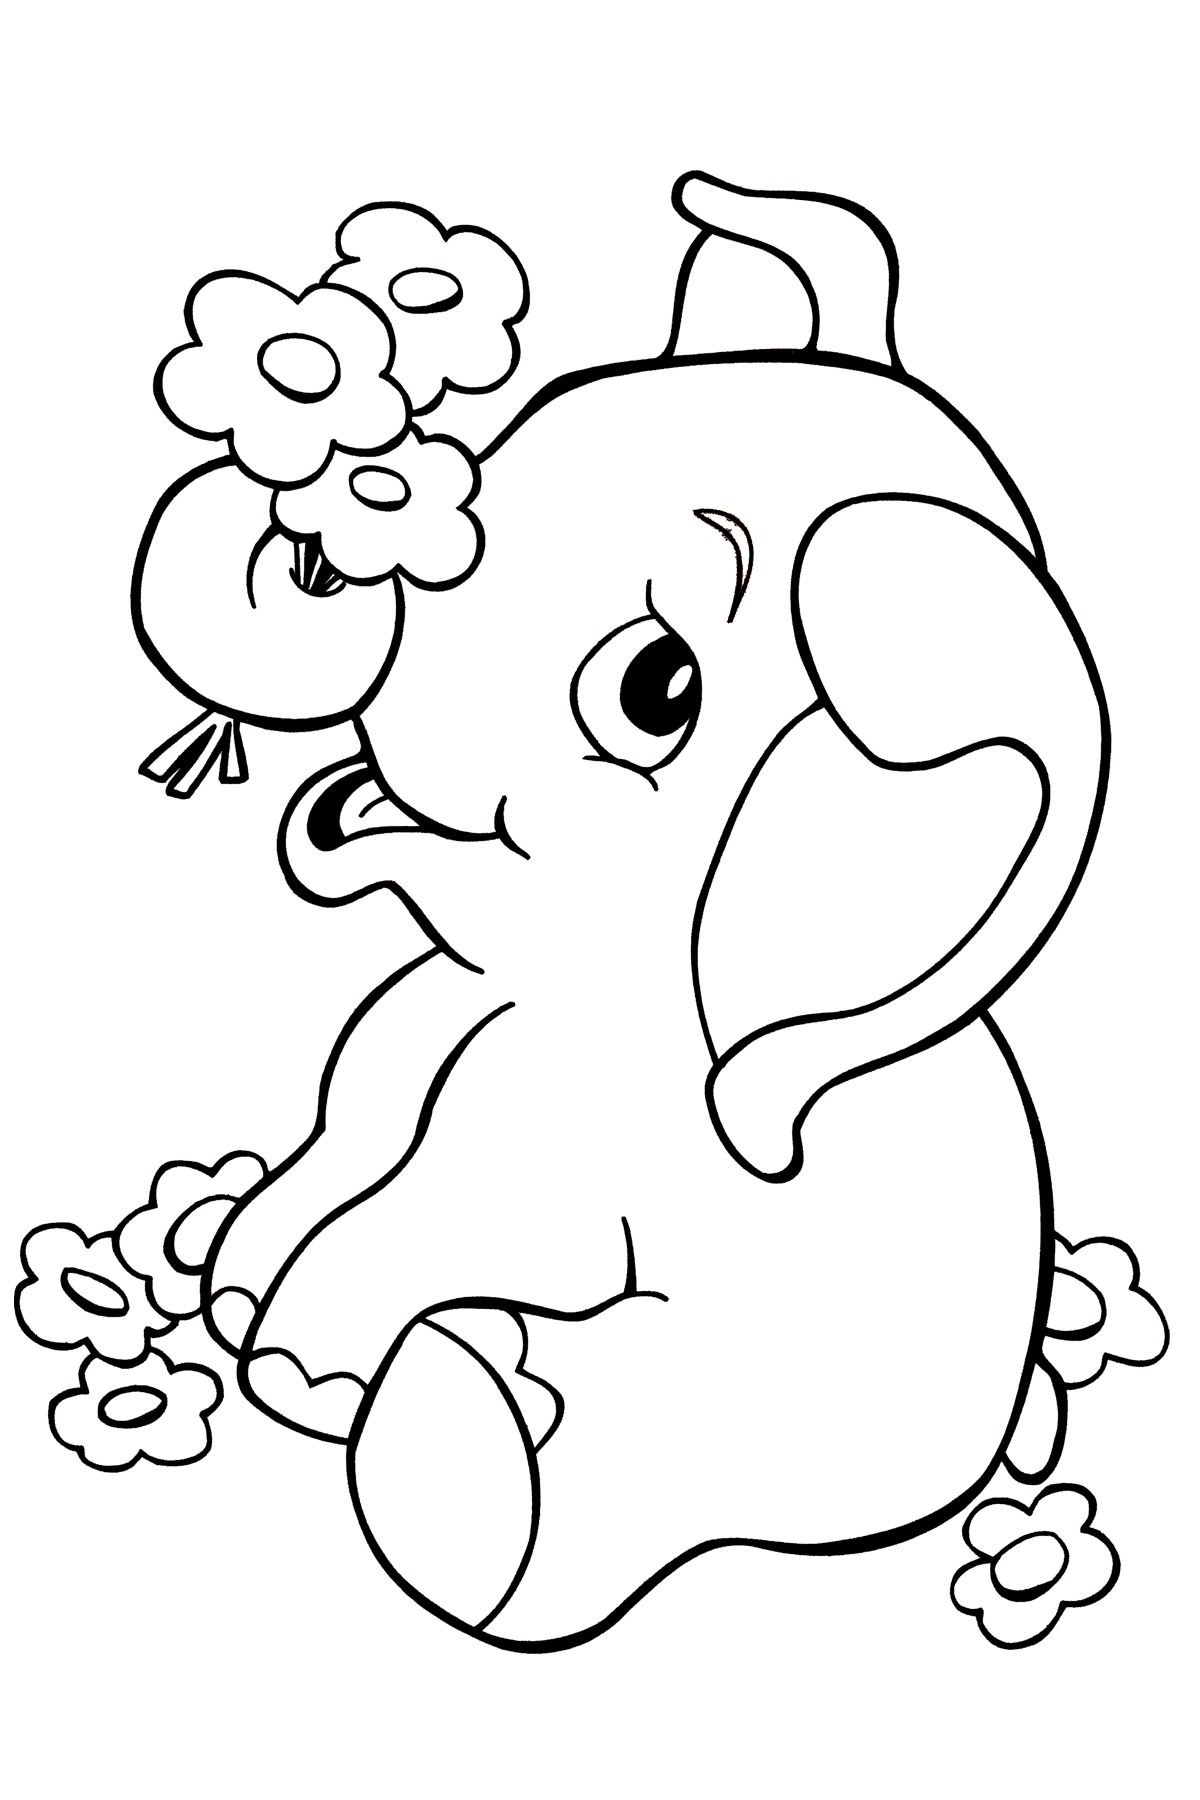 Free printable elephant coloring pages for kids